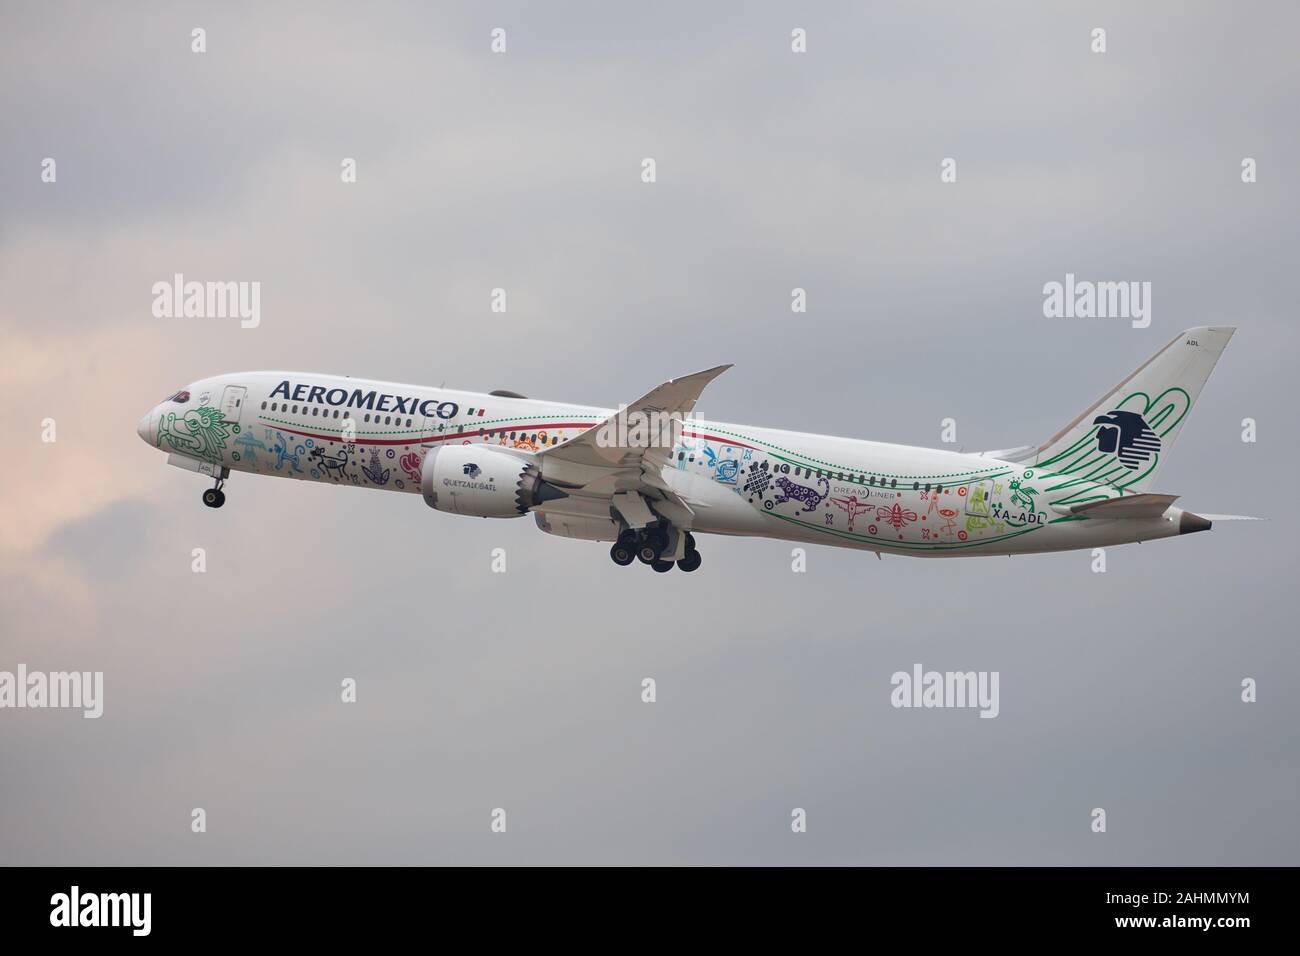 Barcelona, Spain - December 29, 2019: Aeromexico Boeing 787-9 Dreamliner with Quetzalcoatl special livery taking off from El Prat Airport in Barcelona Stock Photo